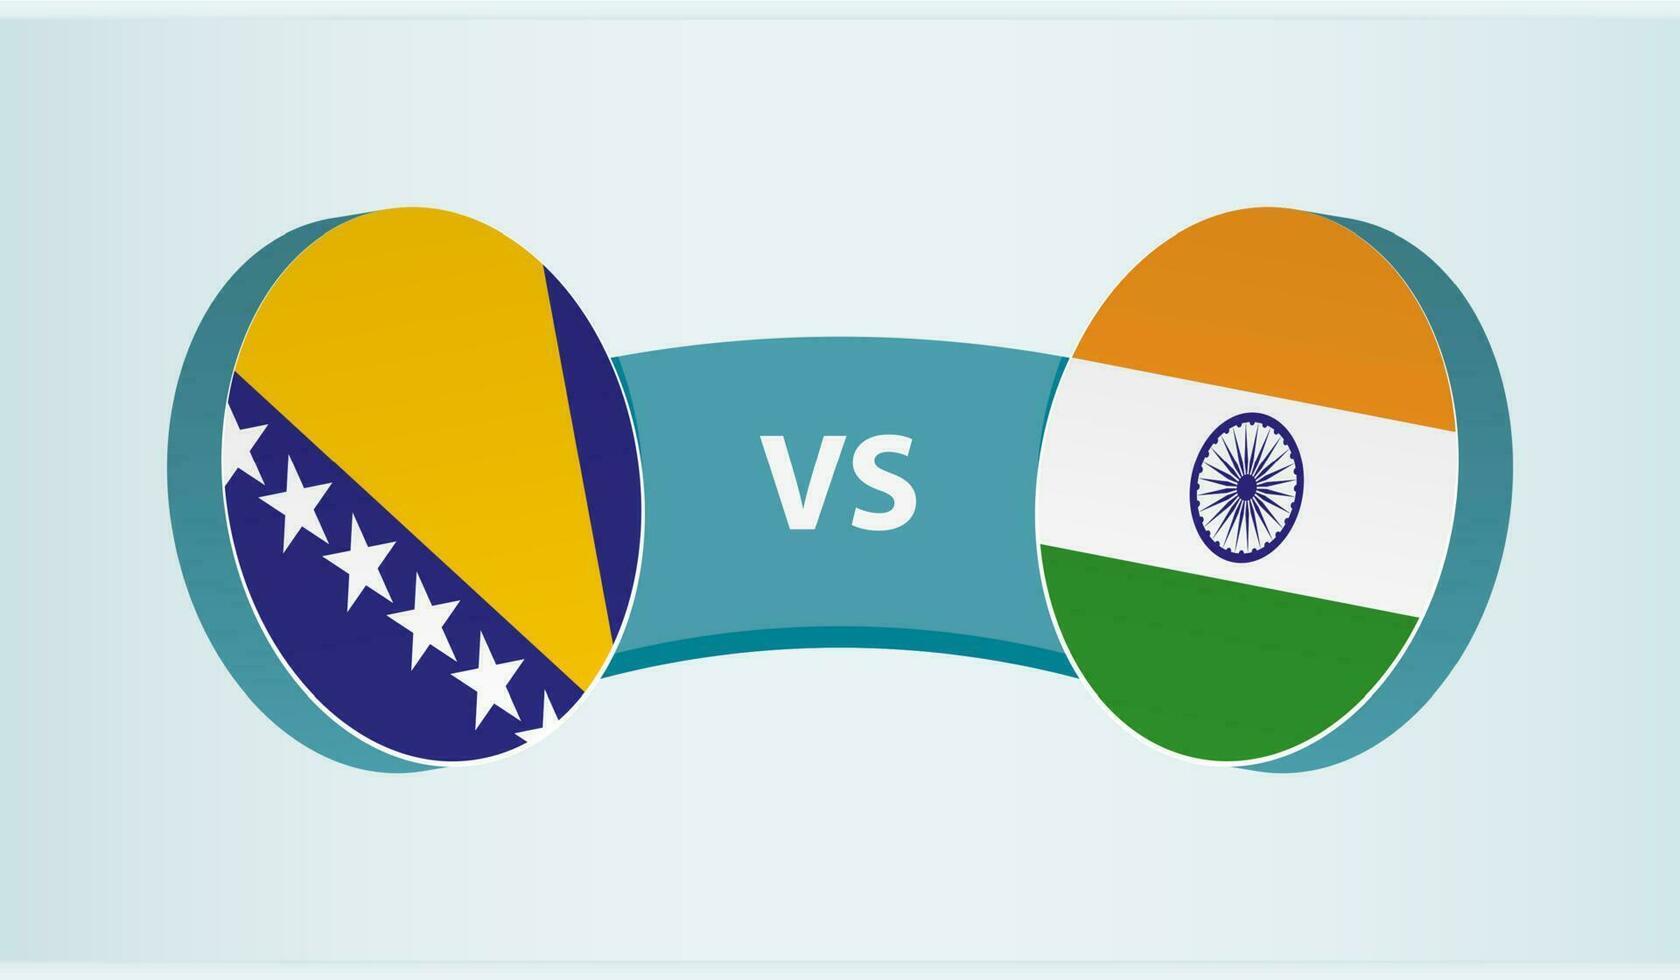 Bosnia and Herzegovina versus India, team sports competition concept. vector